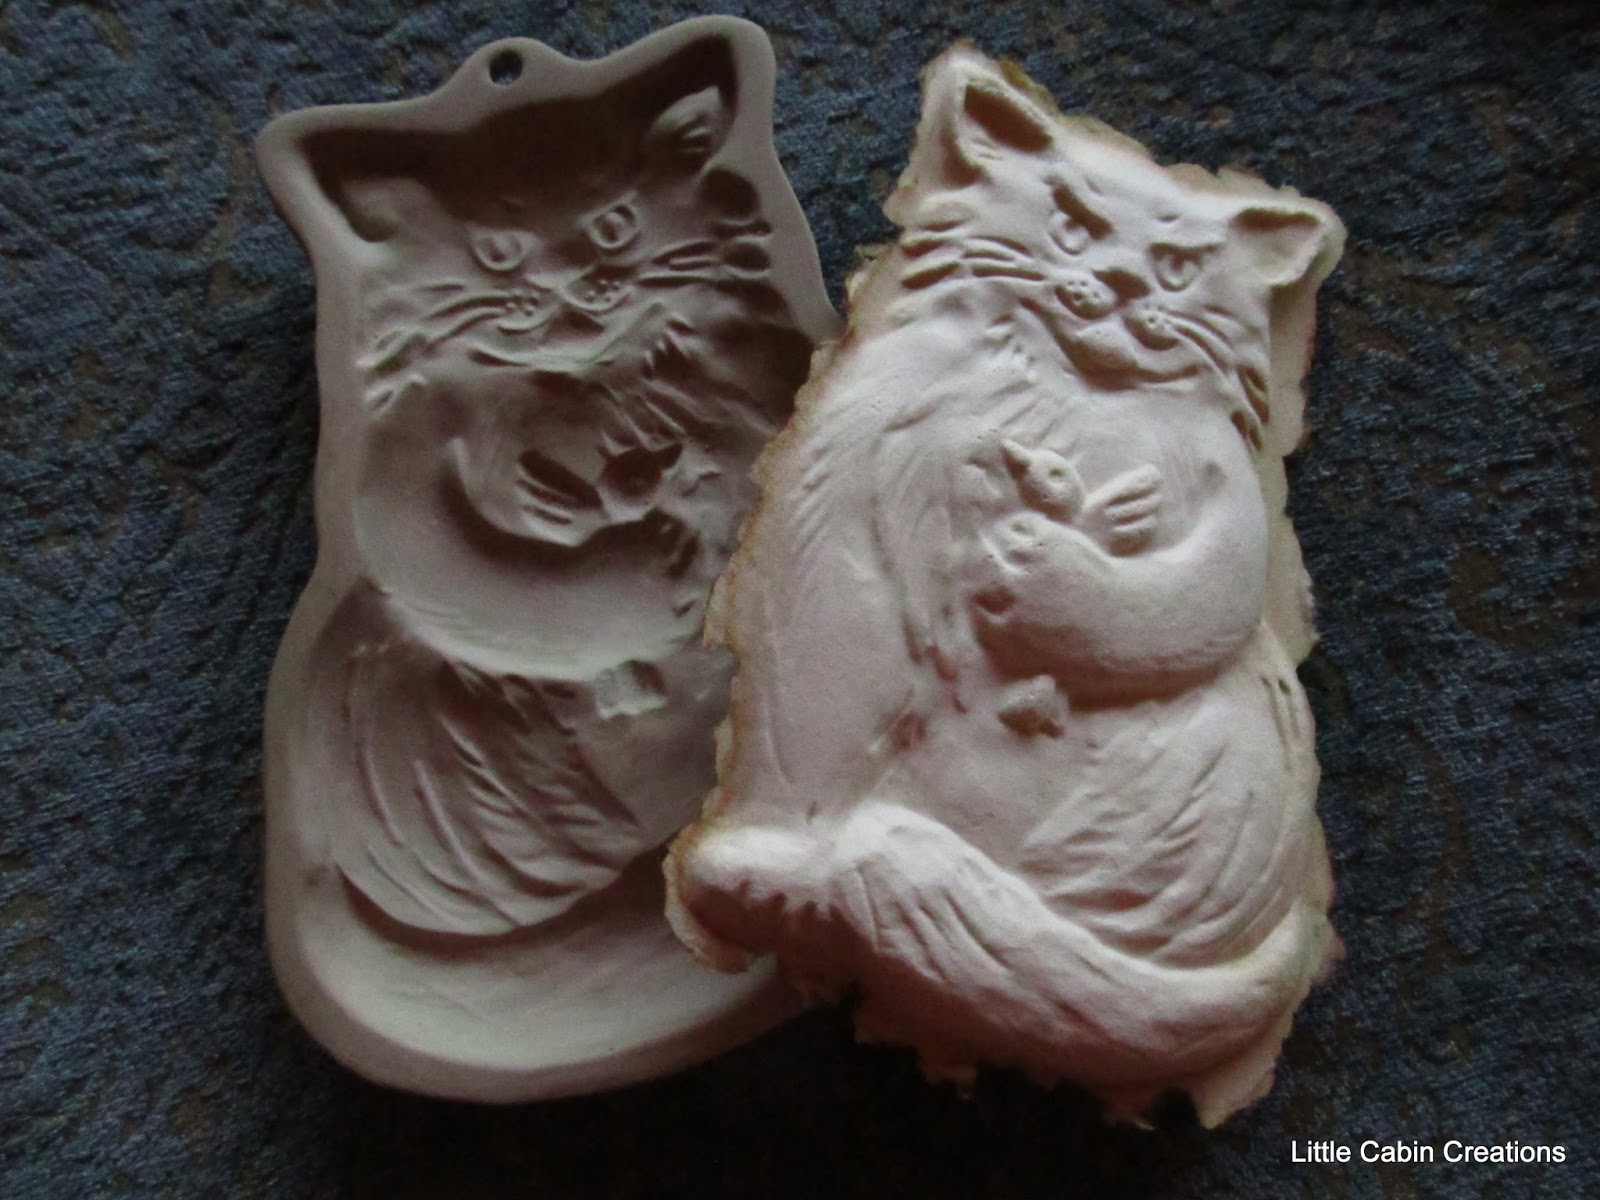 Retired Cookie Molds – Page 3 – Brown Bag Cookie Molds